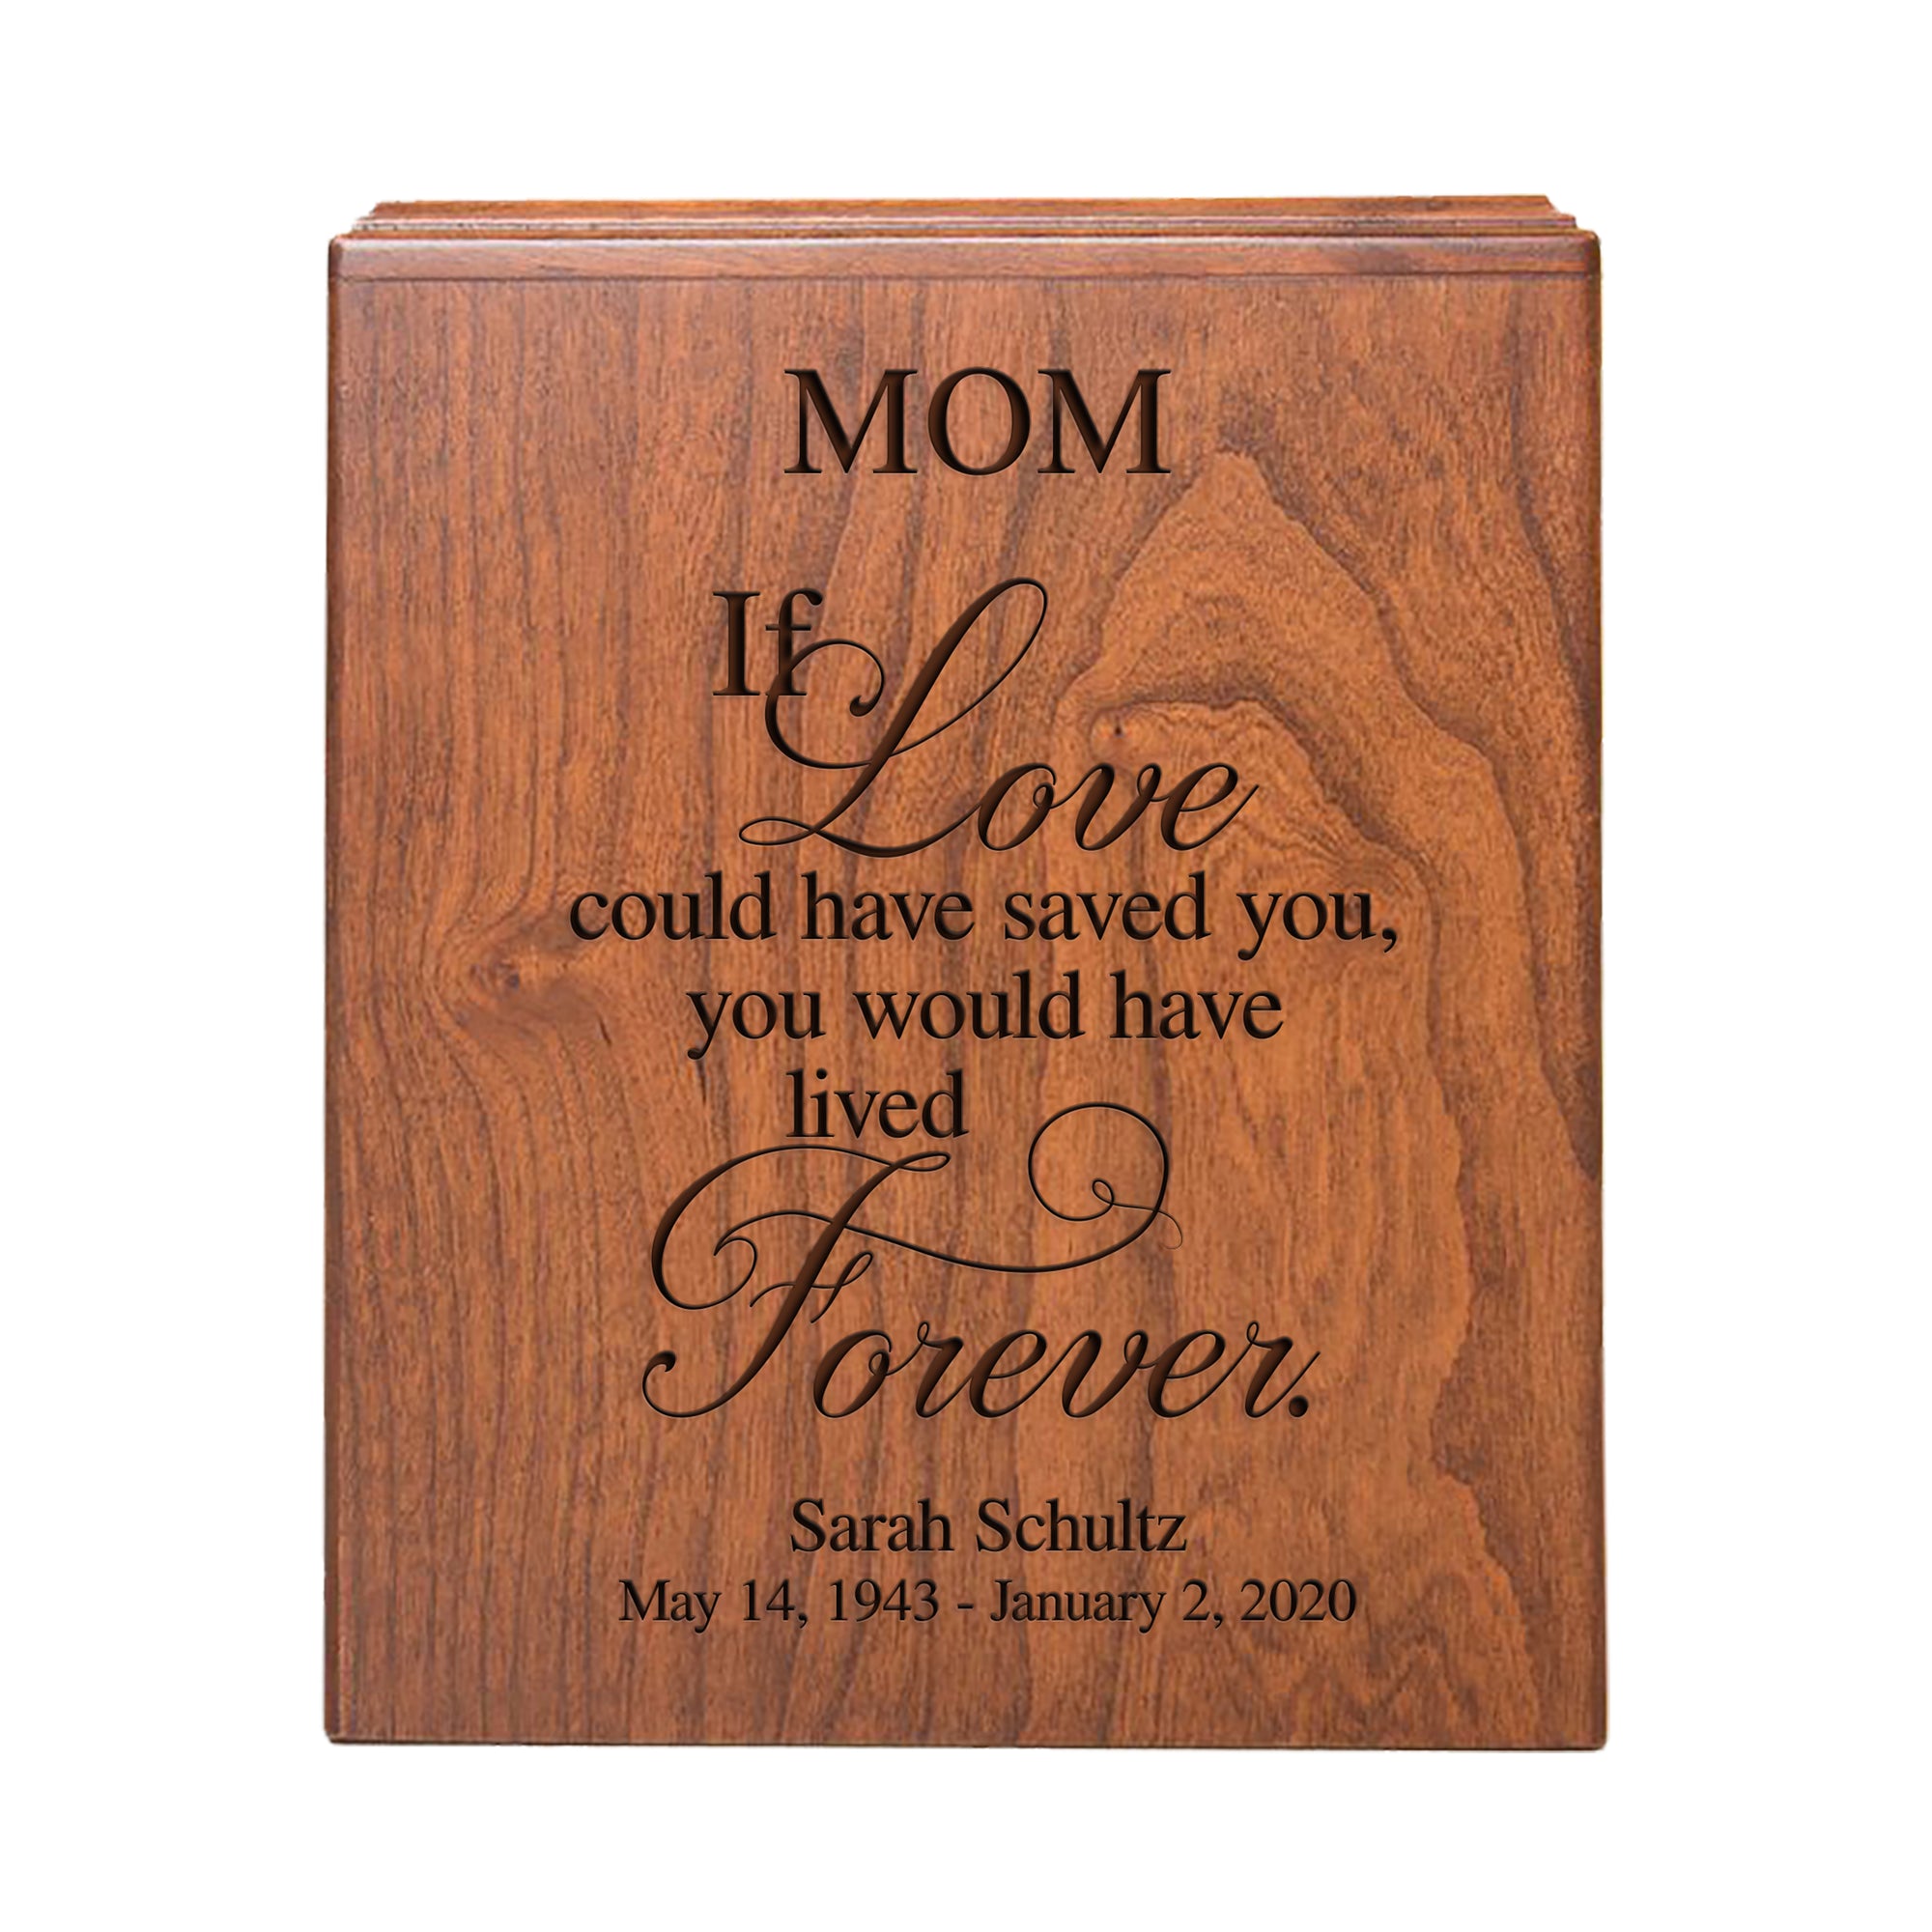 LifeSong Milestones Personalized Memorial Urn Box for Human Ashes holds 280 cu in If Love Could Bereavement Keepsake Box Family Condolence Gift - 7.75” x 9.5” x 5.75”